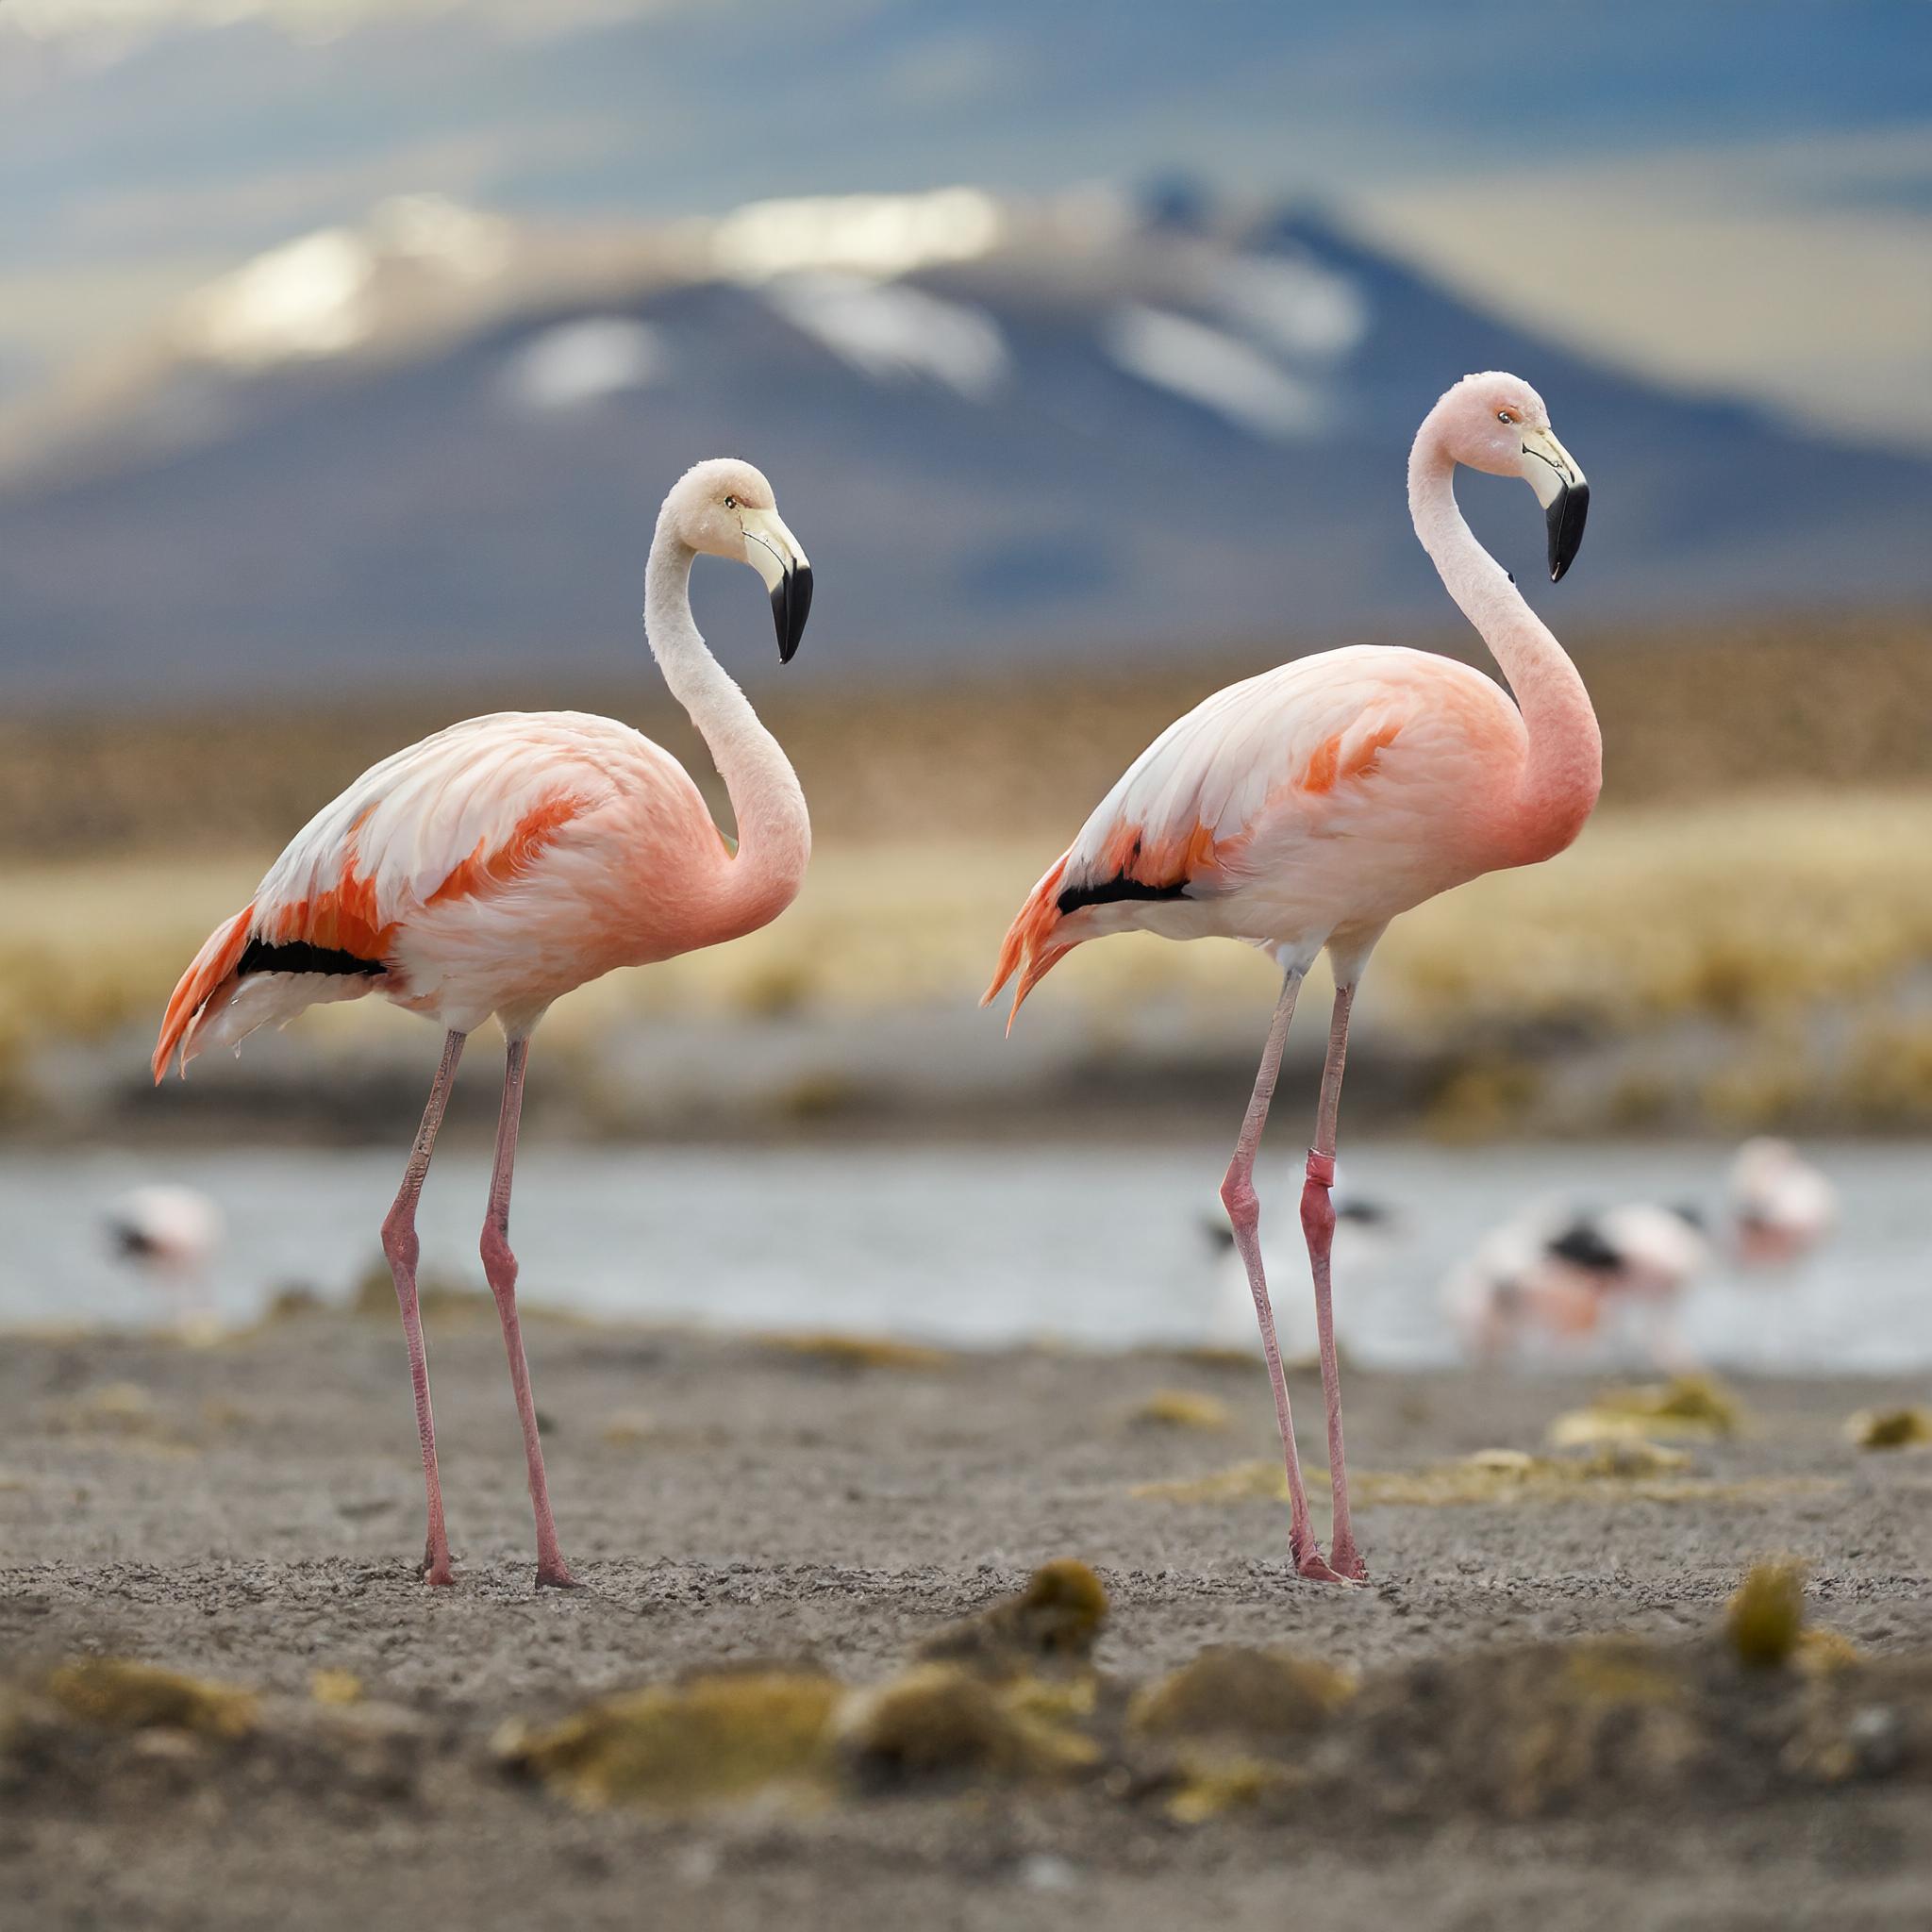 Two Andean flamingos in Patagonia